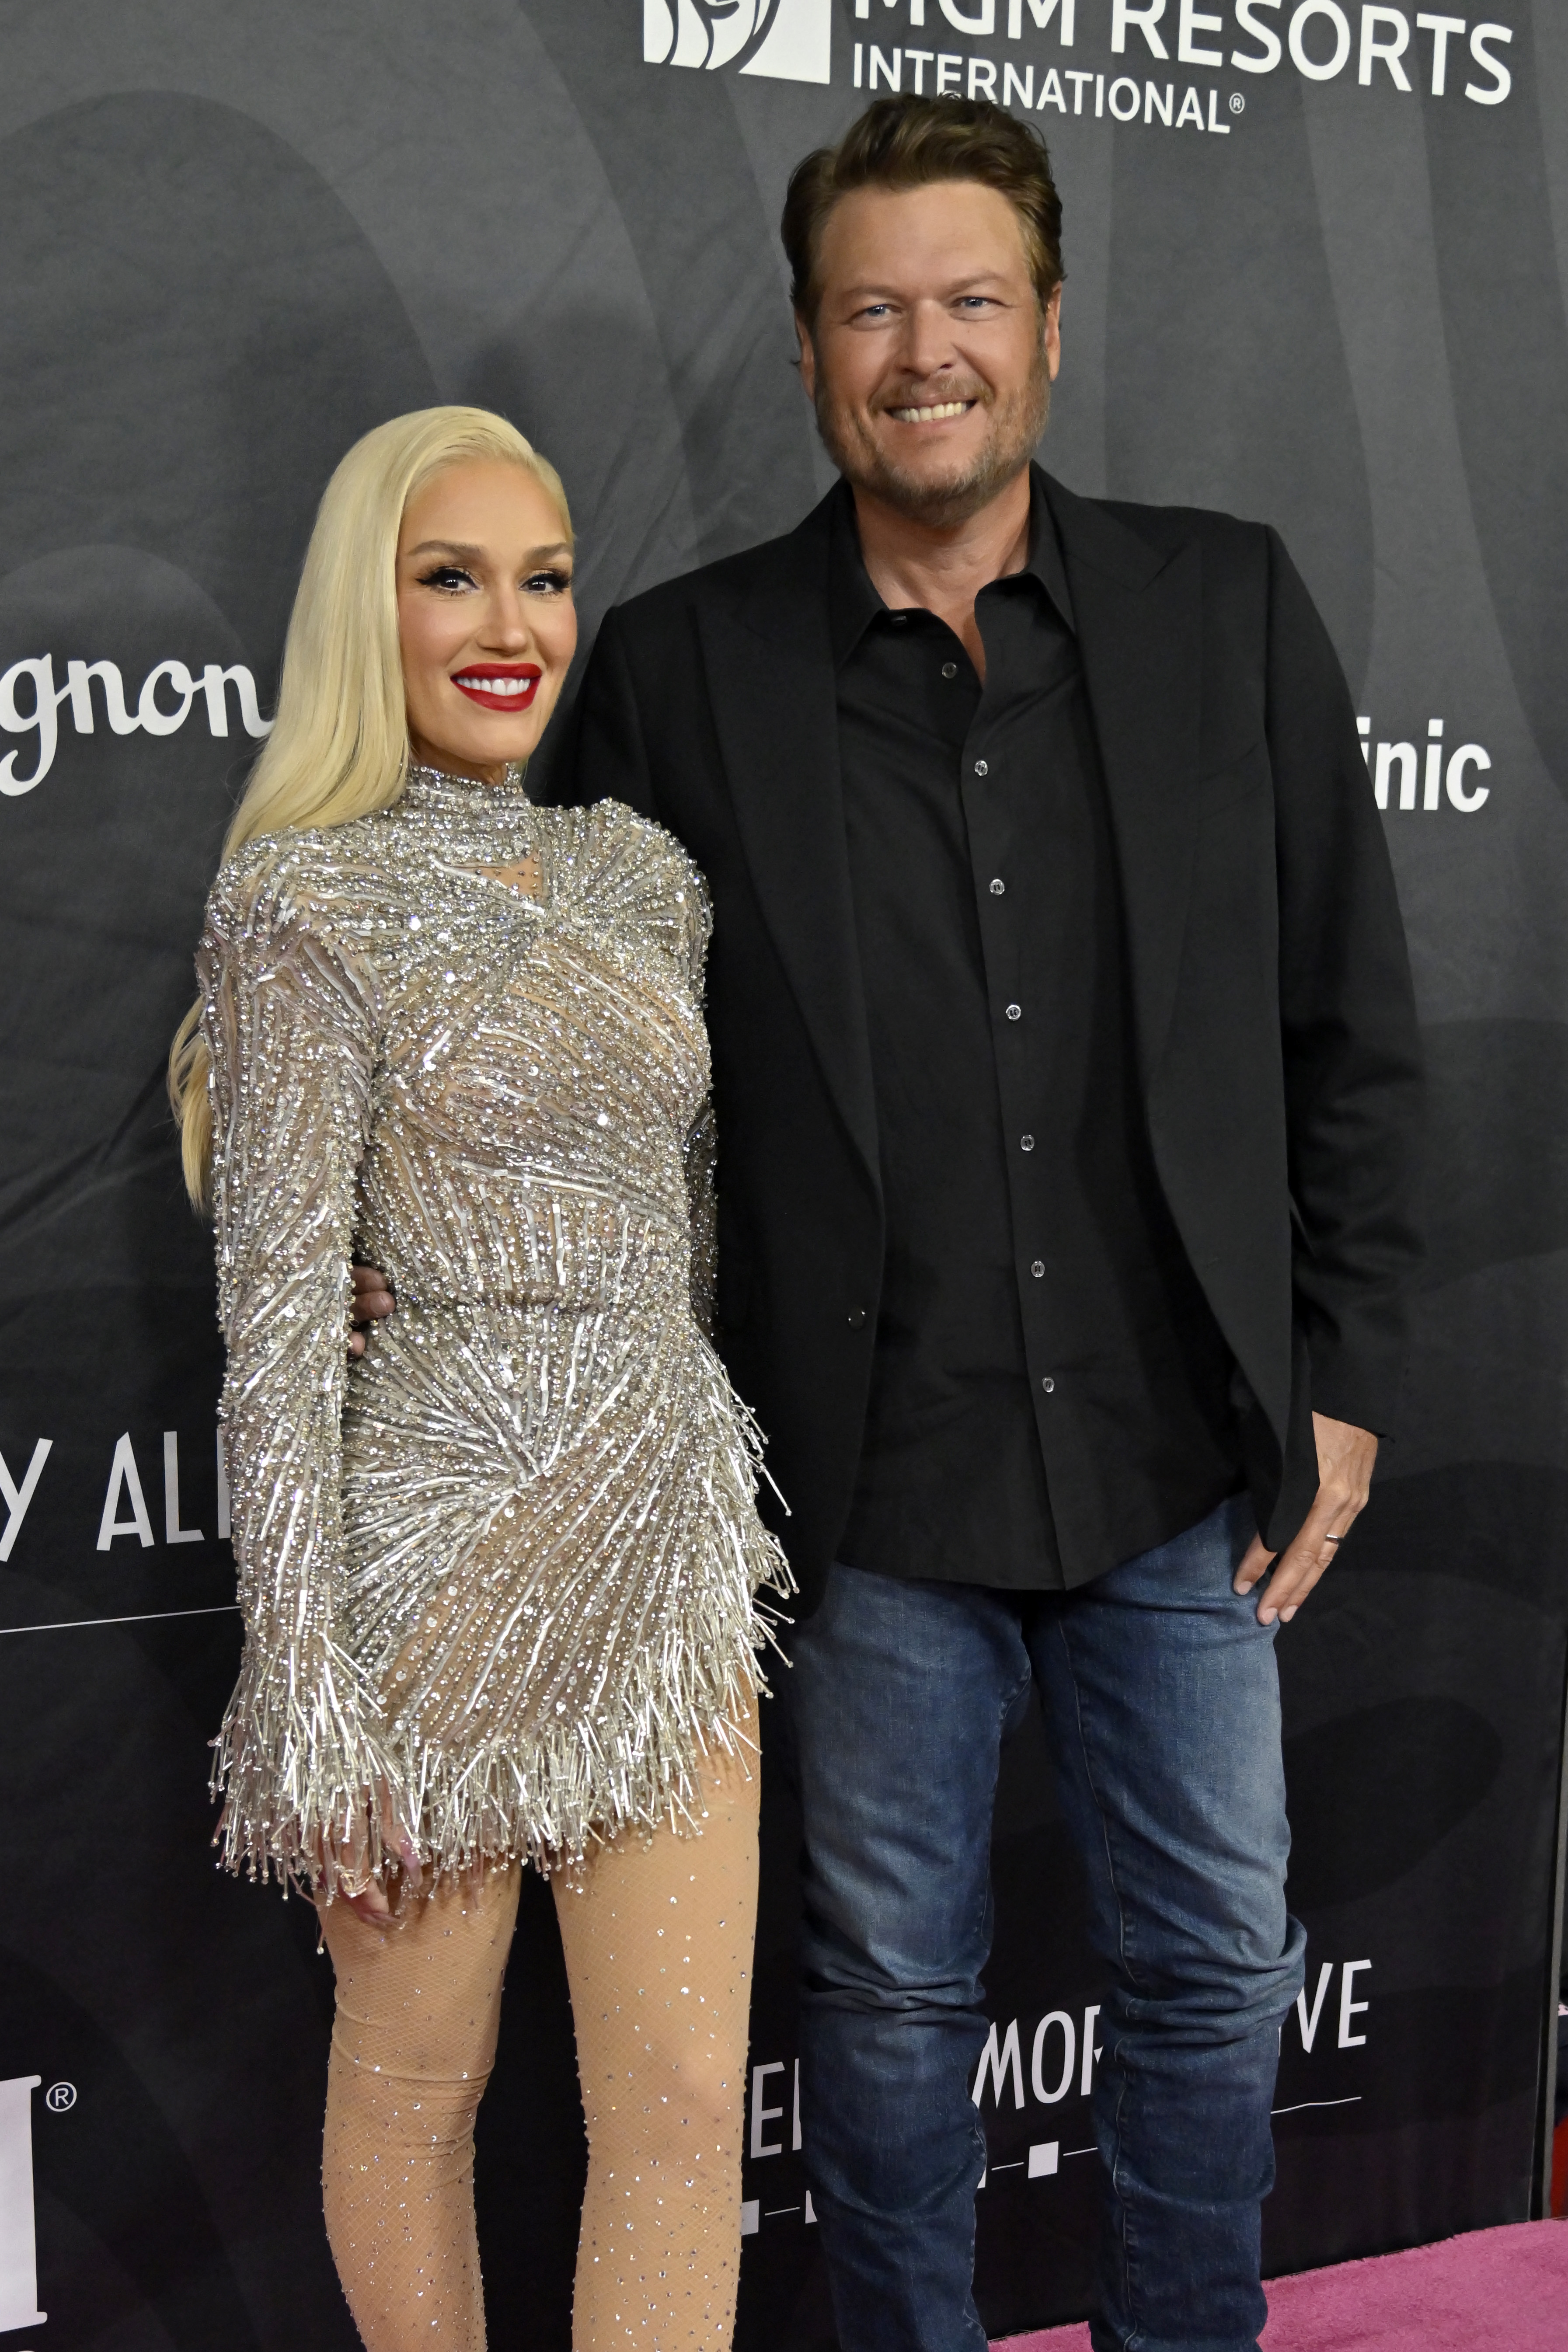 The No Doubt frontwoman dazzled in a short silver dress while Blake looked classy in a dark suit jacket, shirt, and blue jeans combo